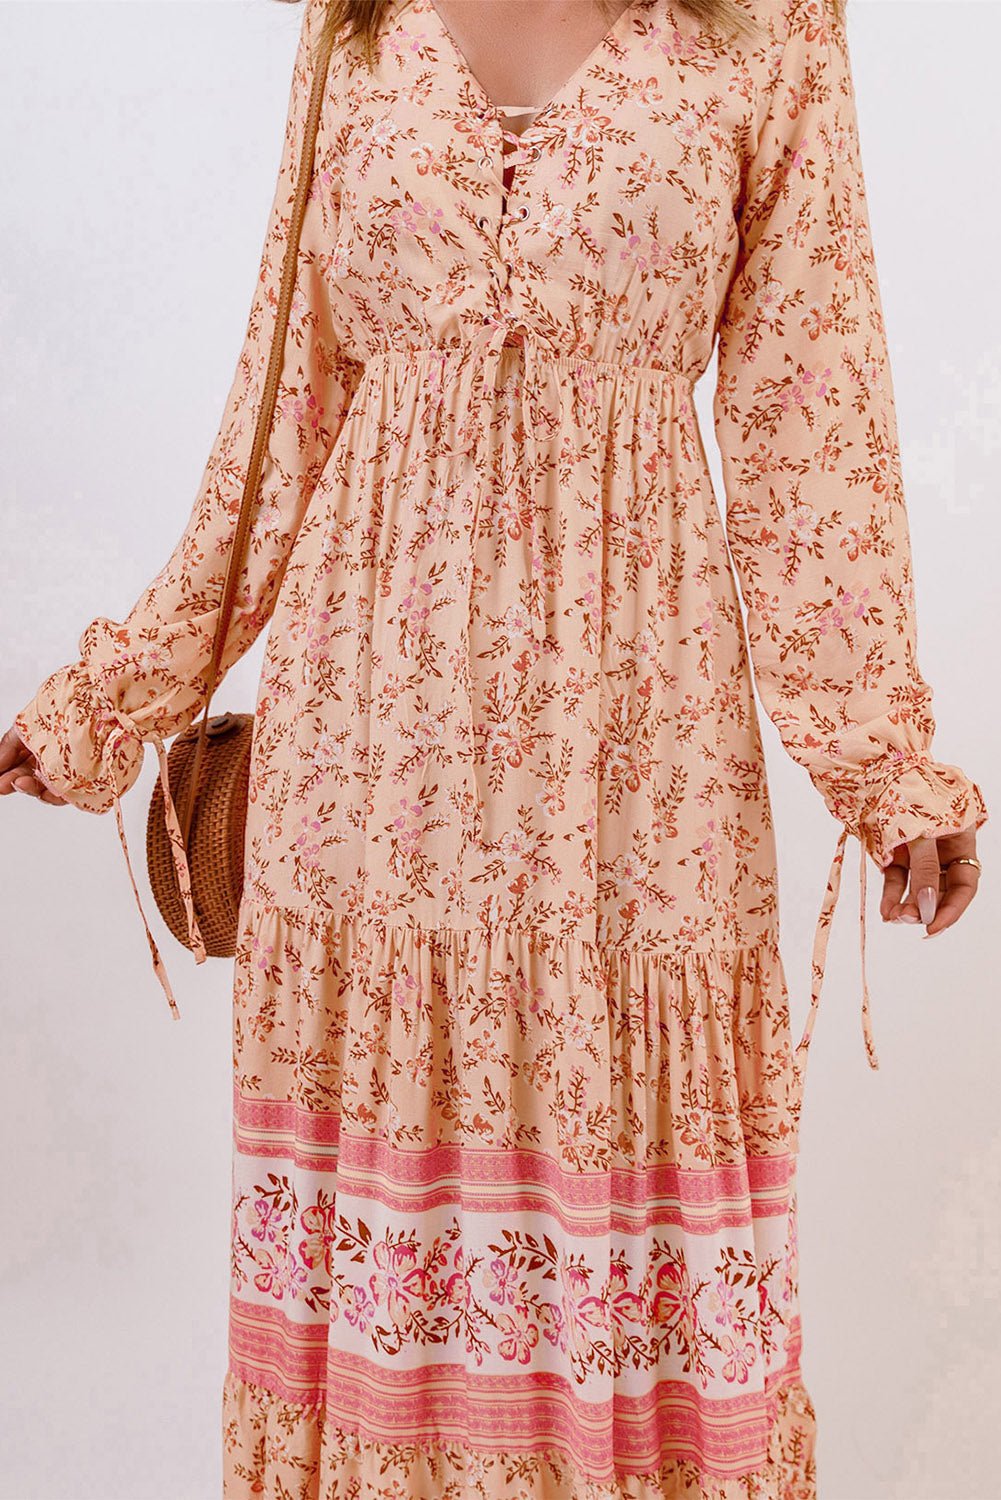 Bohemian Lace-Up Floral Maxi Dress V Neck - peach maxi dress with long sleeves and lace up front. #Firefly Lane Boutique1